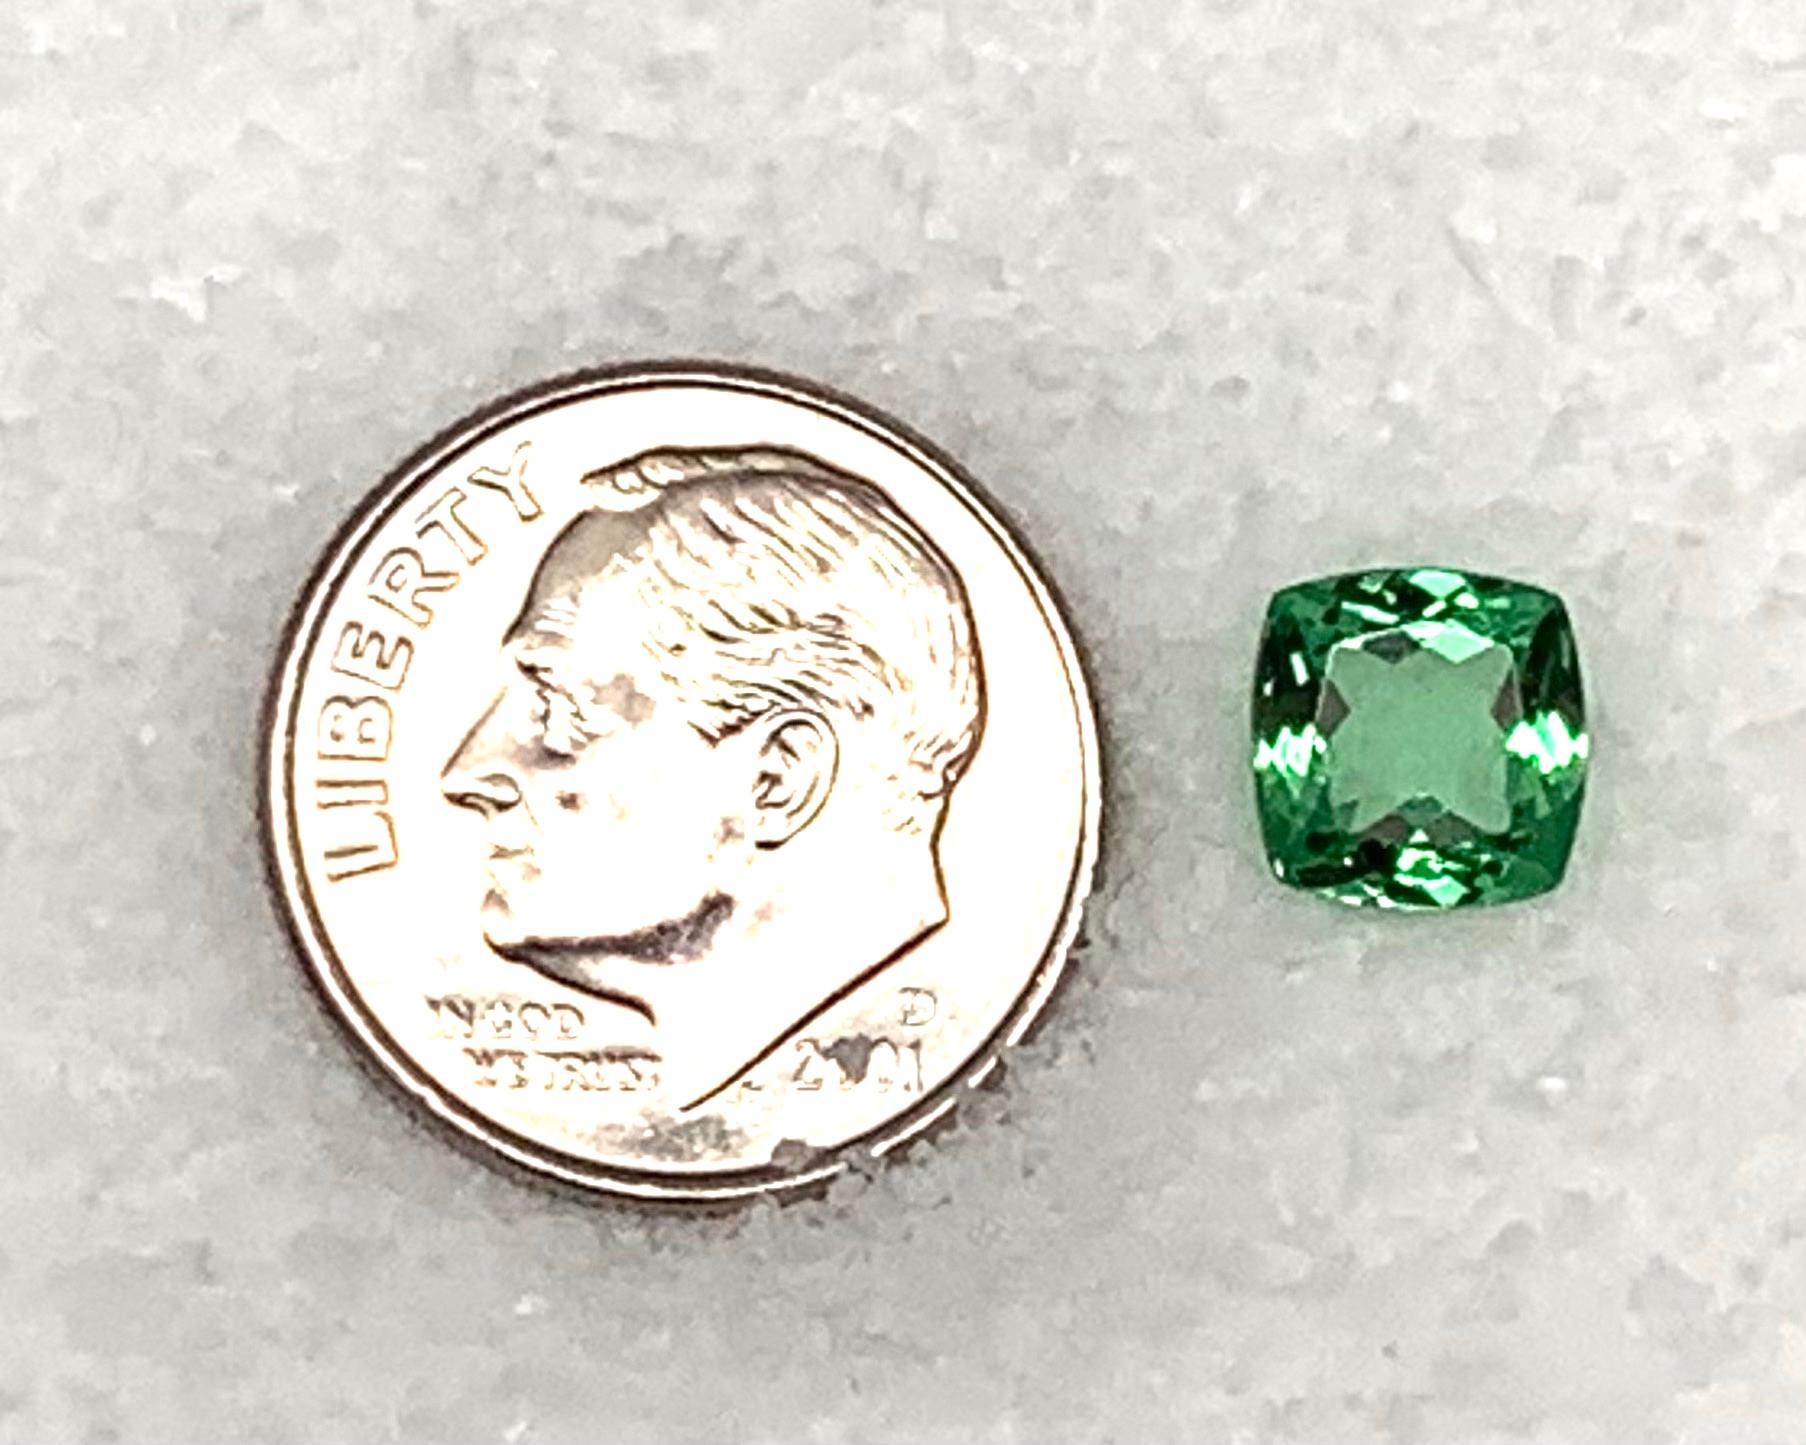 This pretty tsavorite garnet is so bright and lively! The perfect shade of spring green, this gem measures 7.01 x 6.88 x 3.70 millimeters and weighs 1.62 carats. It would be beautiful set in a ring or pendant, is eye clean, and such a happy color! A